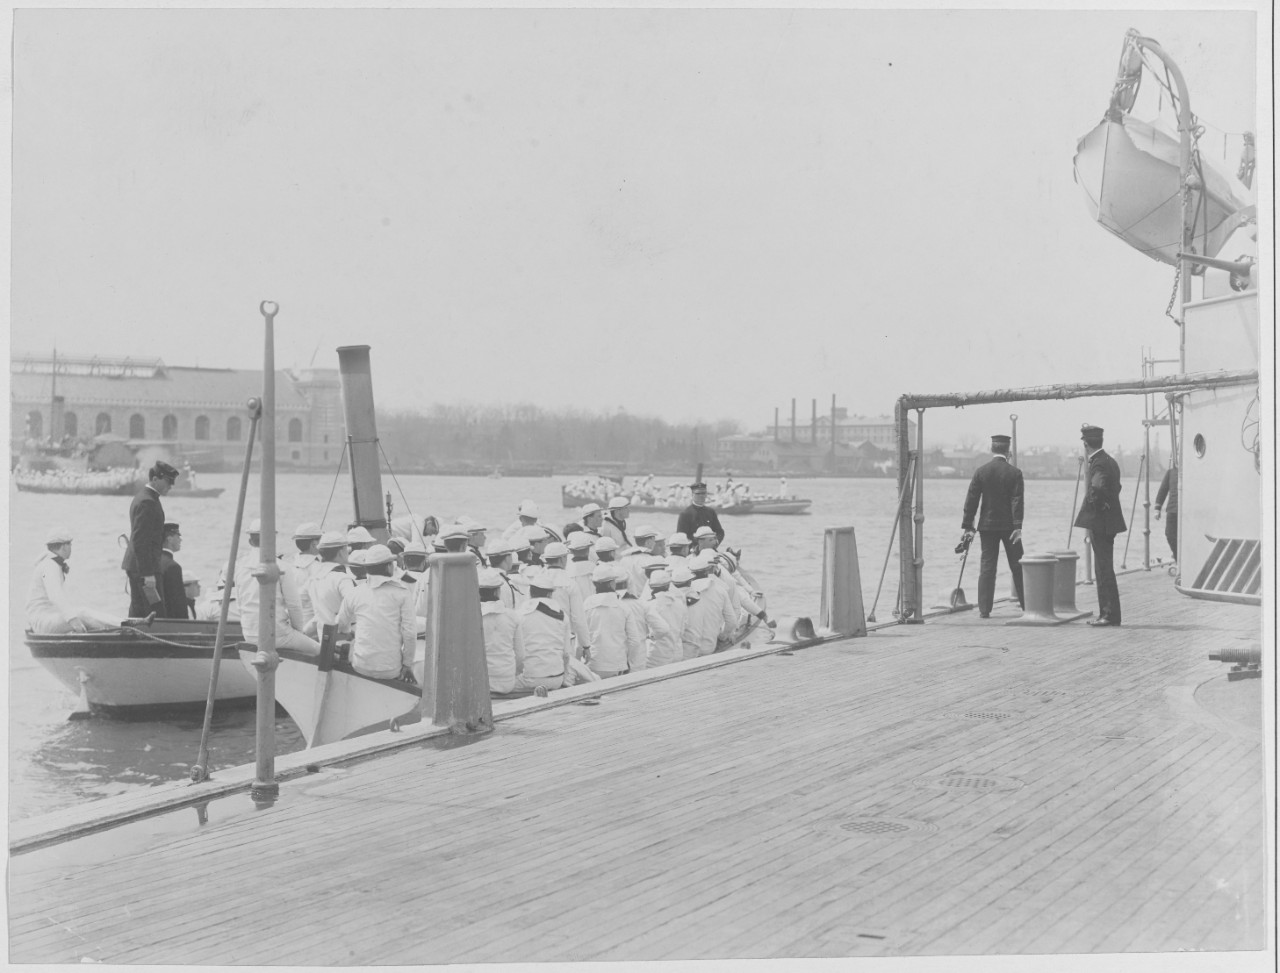 Getting off the ship class of 1905